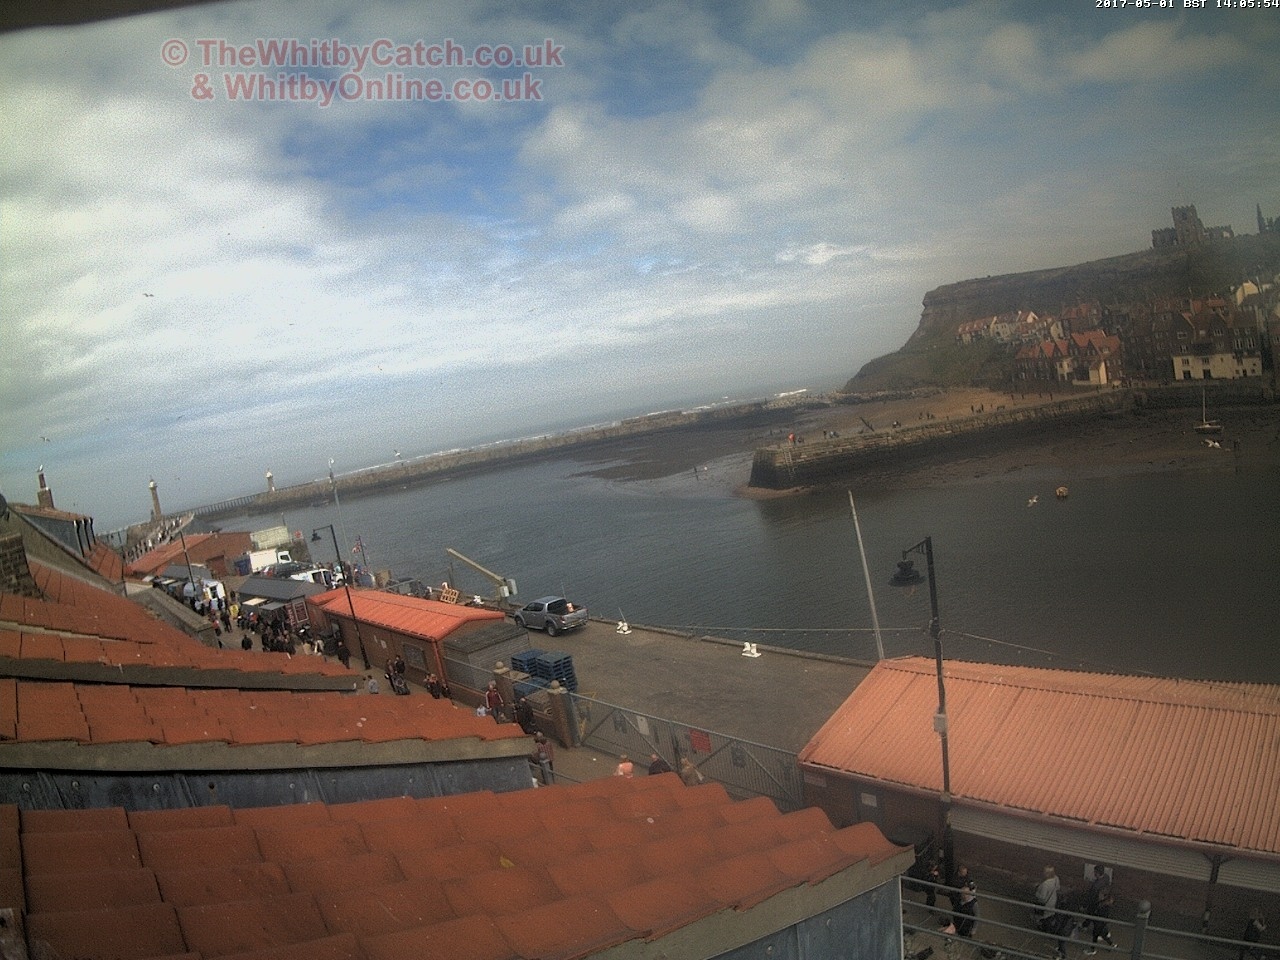 Whitby Mon 1st May 2017 14:06.